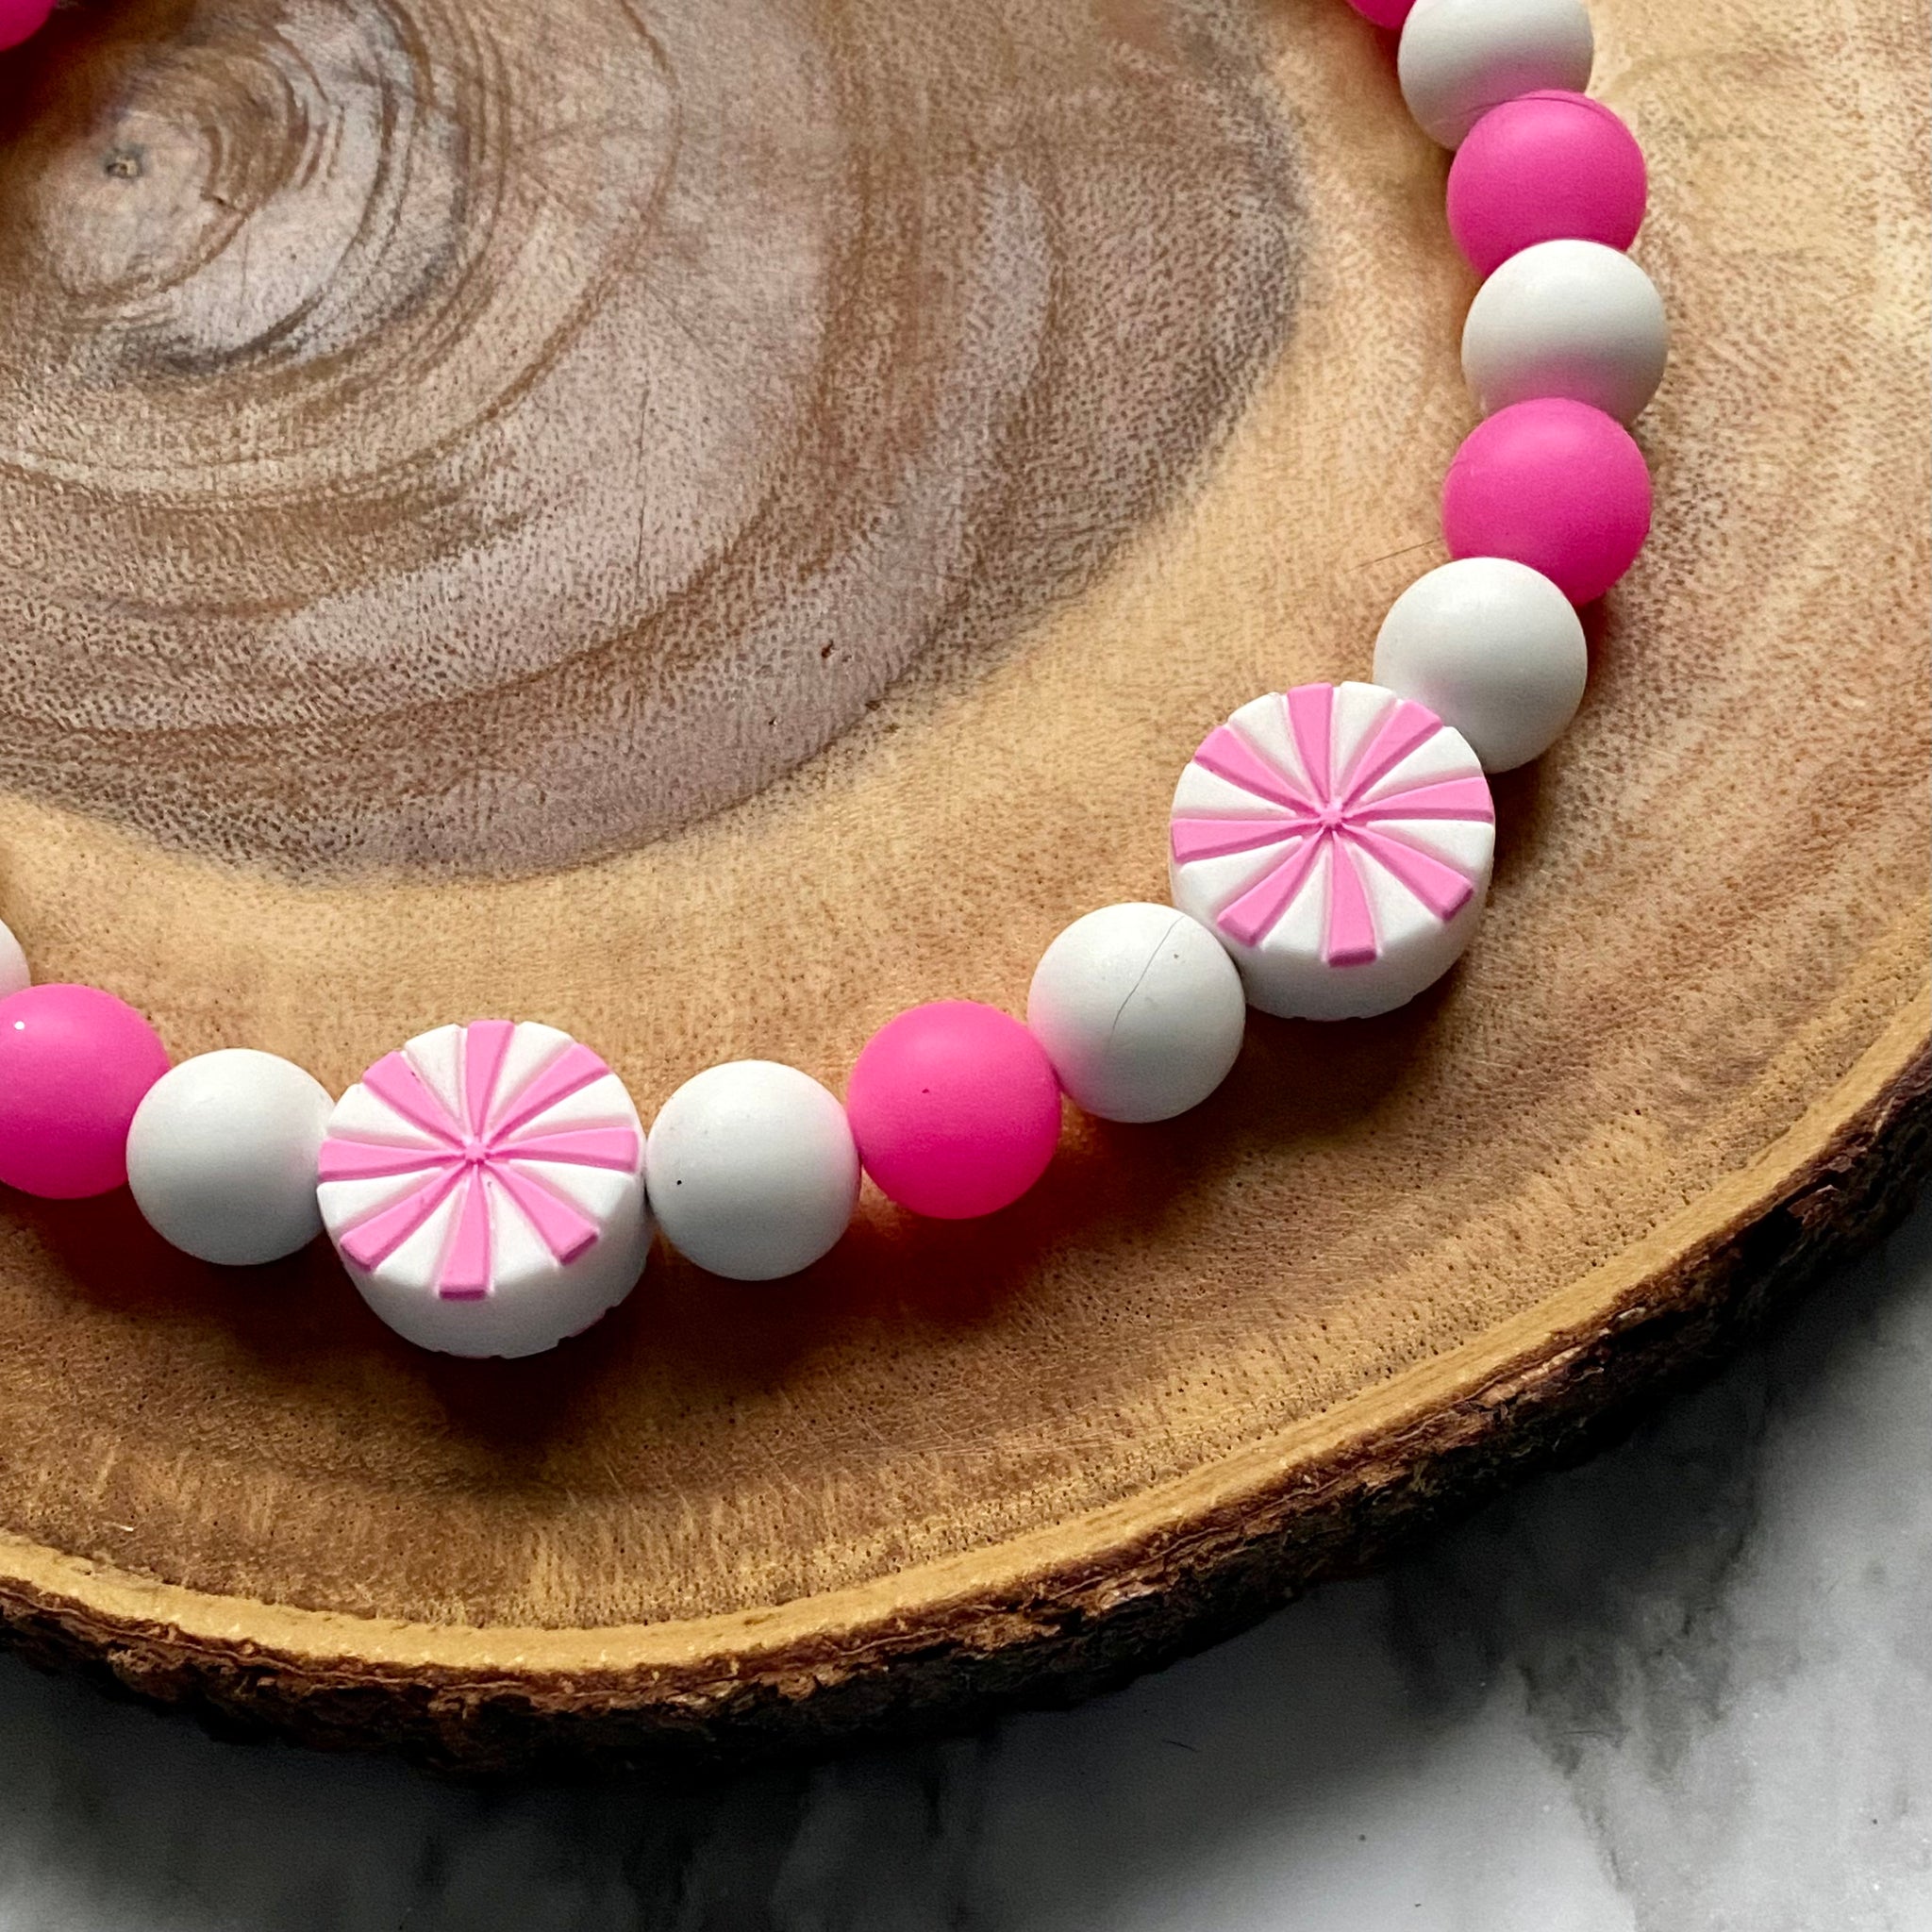 Pink Candy Glow in the Dark Beaded Collar